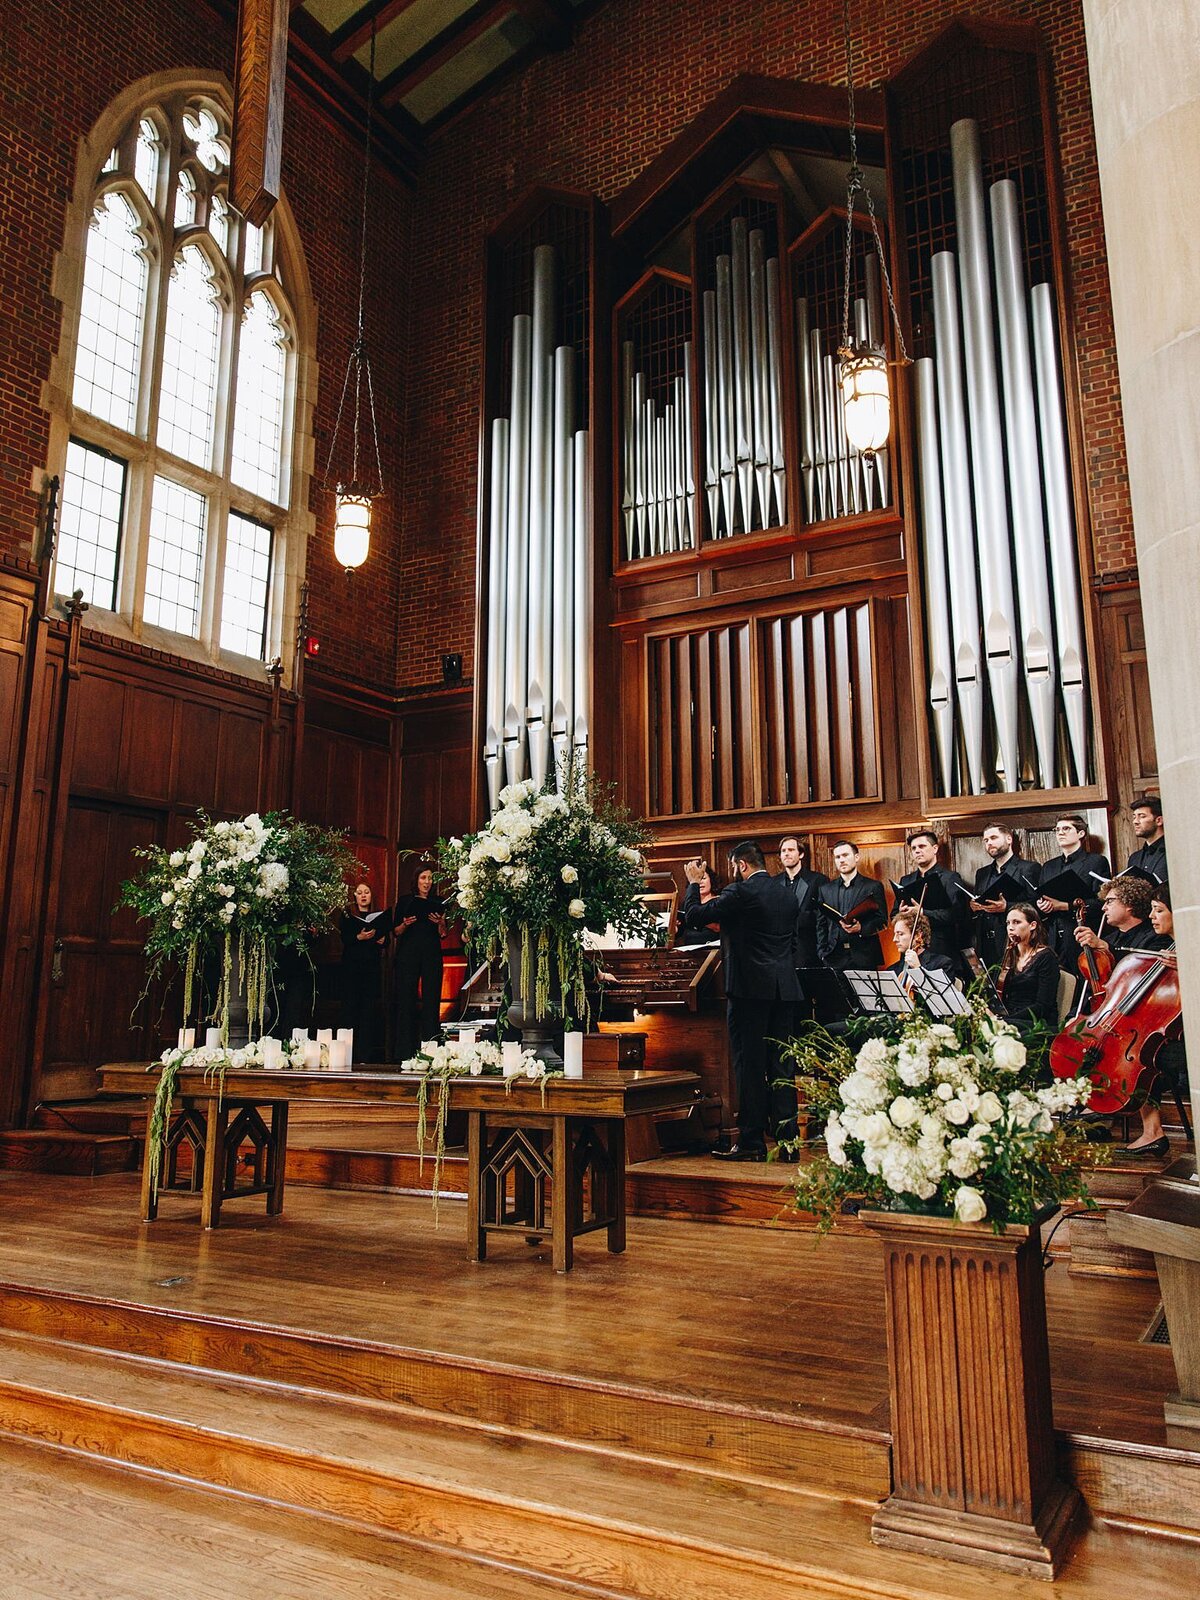 Orchestra plays music for a wedding at Scarritt Bennett on the church alter next to the large pip organ. The altar is decorated with  lots of white candles and tall floral arrangements with hydrangea, white roses and greenery.